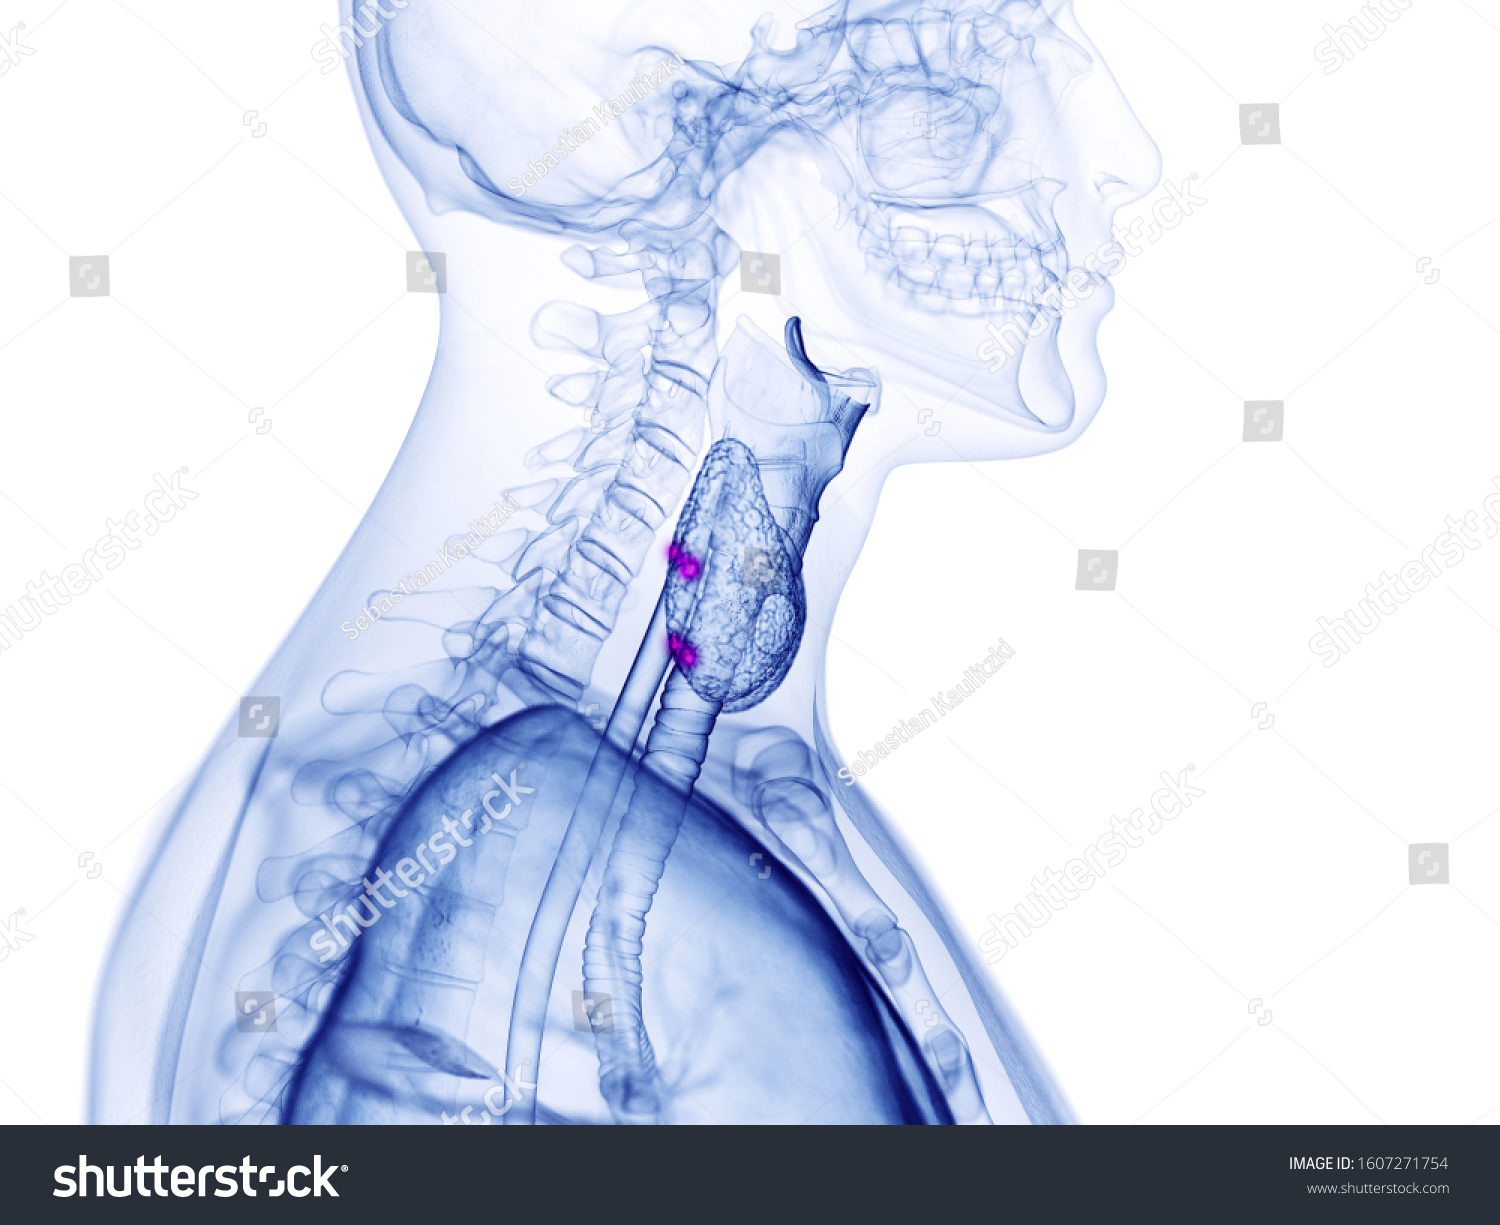 13 Para Thyroiditis Images Stock Photos And Vectors Shutterstock